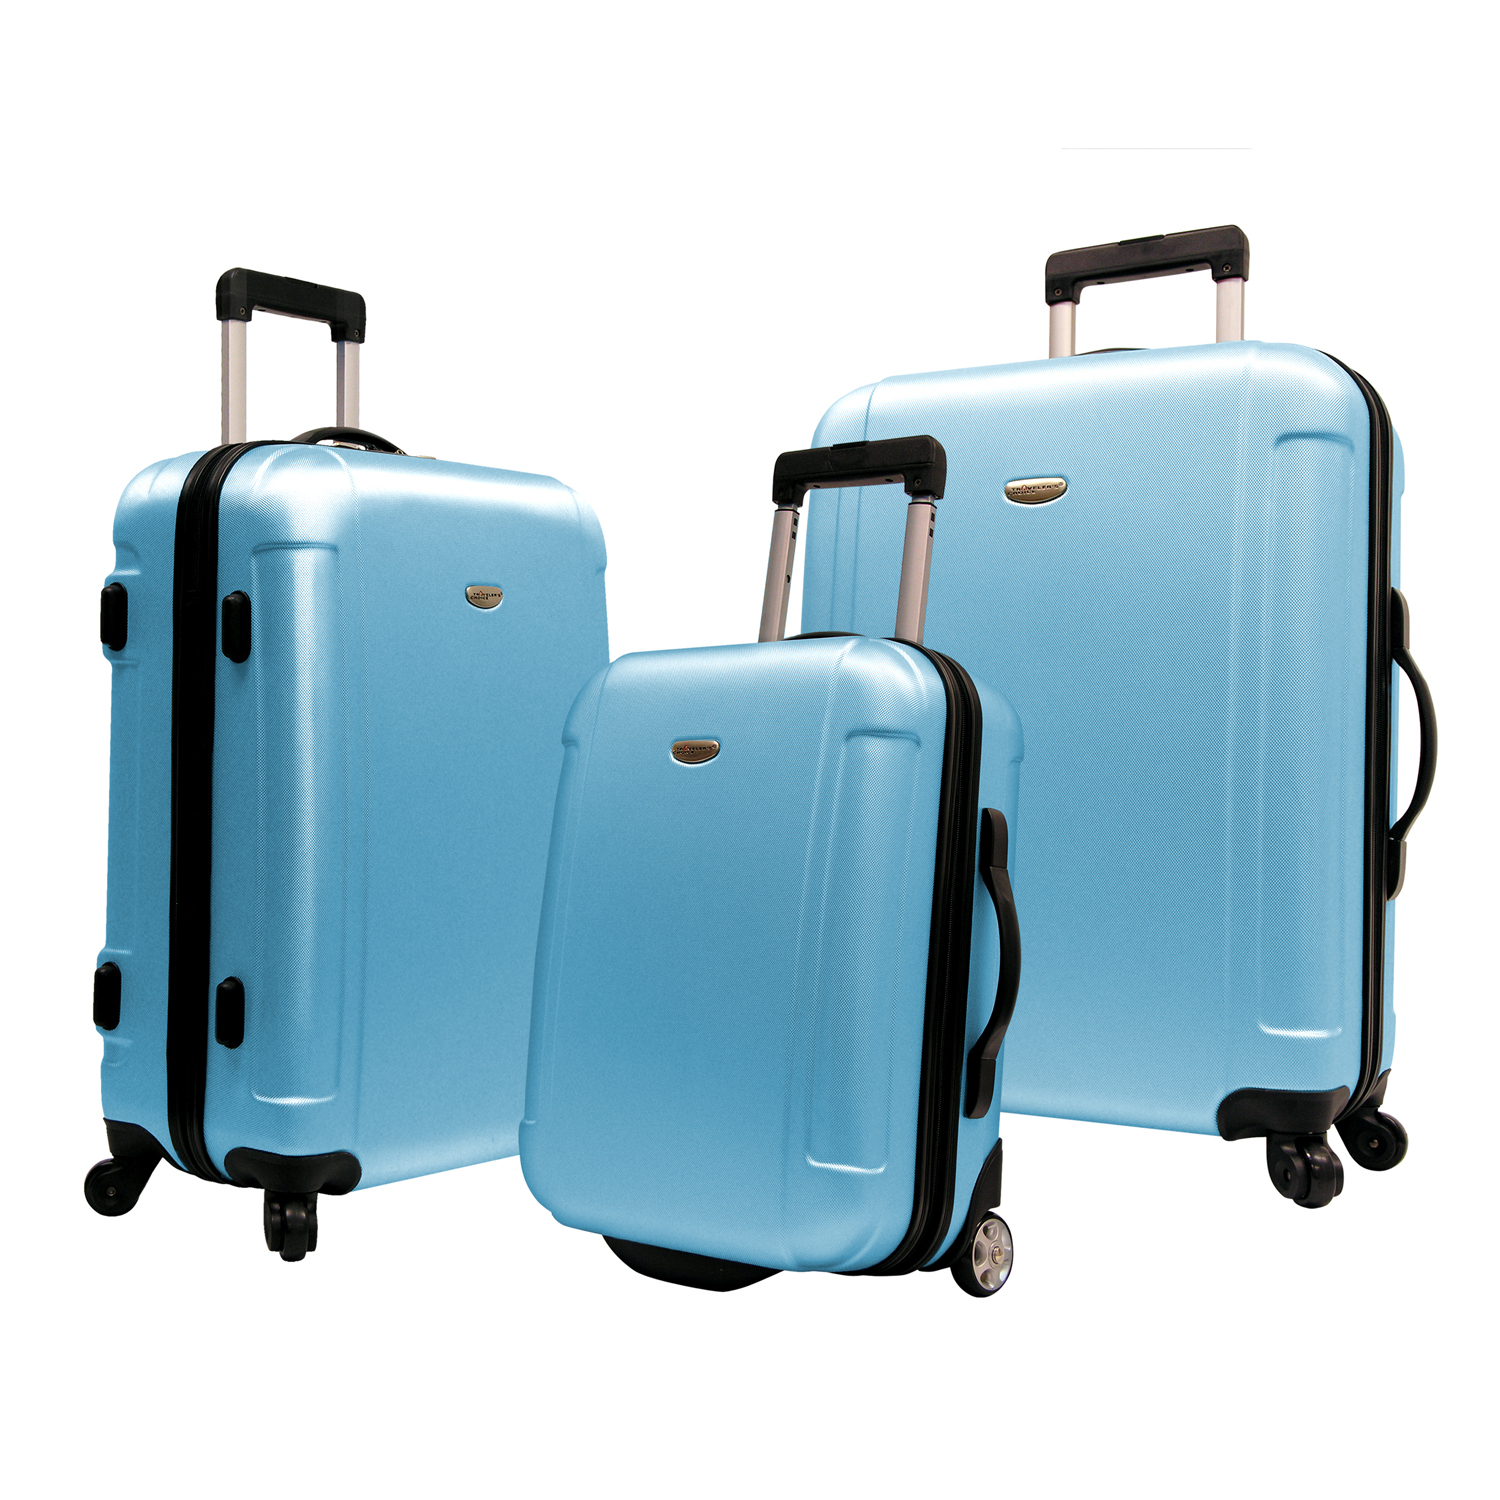 Traveler's Choice Freedom 3-Piece Ultra-Lightweight Hardside Spinners & Roller Luggage Set - 21" 25" 29" - image 2 of 10